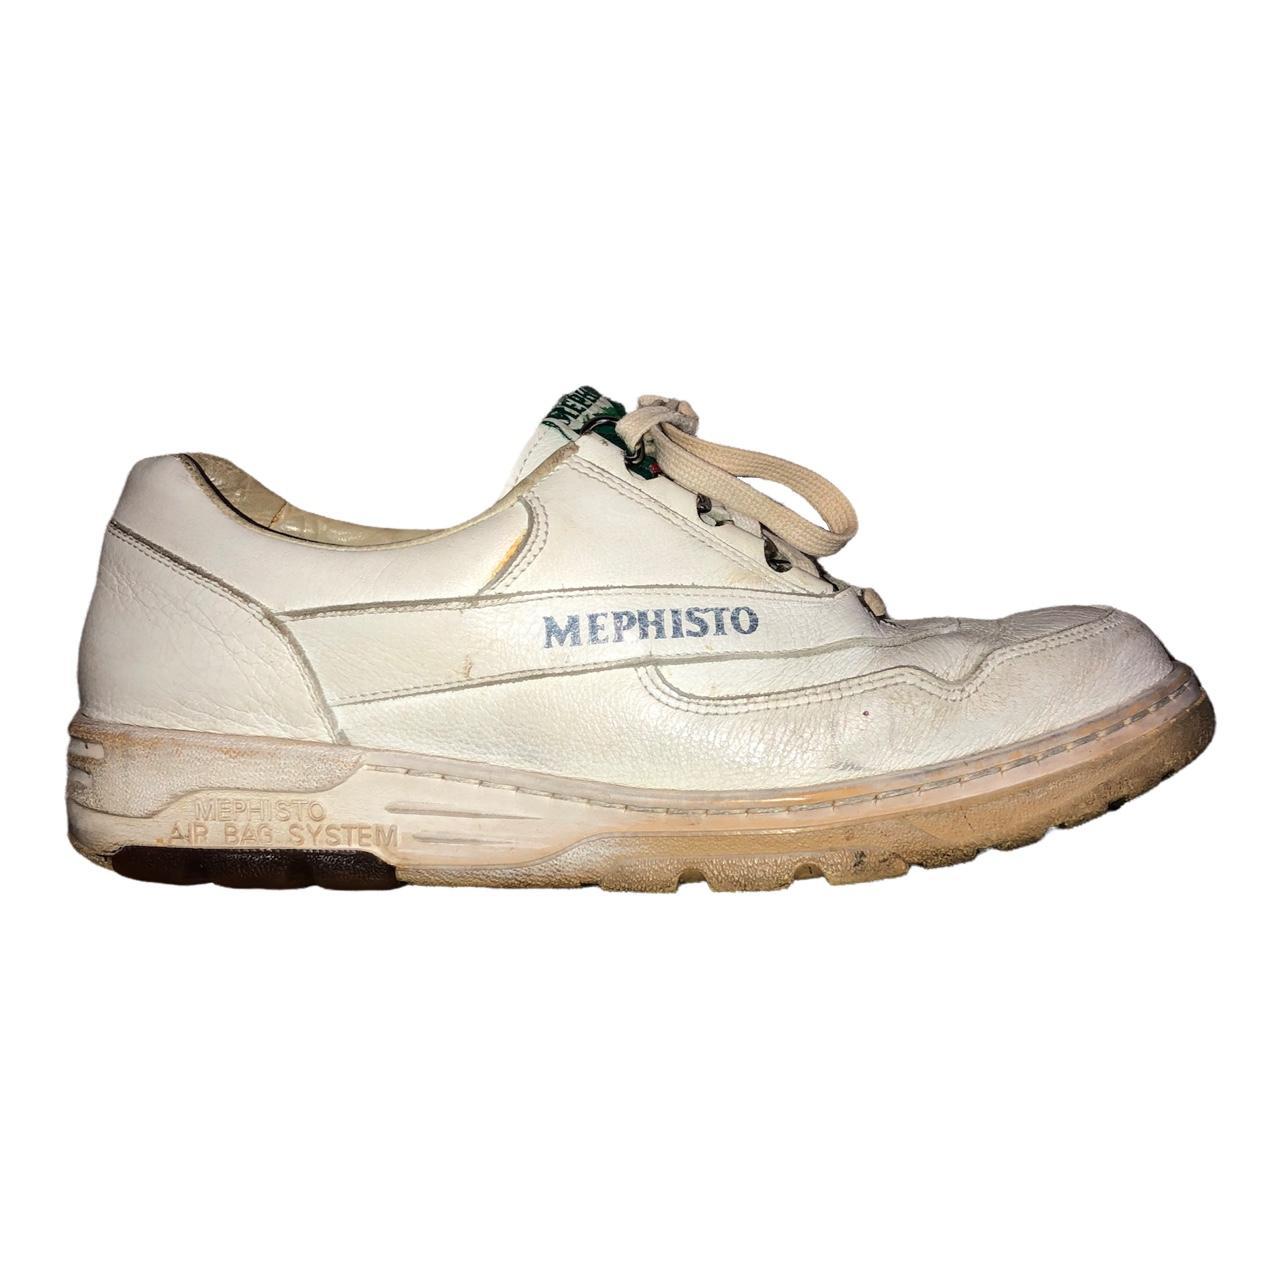 Product Image 2 - Mephisto Sneakers
Dated: 2000s - 2010s

A